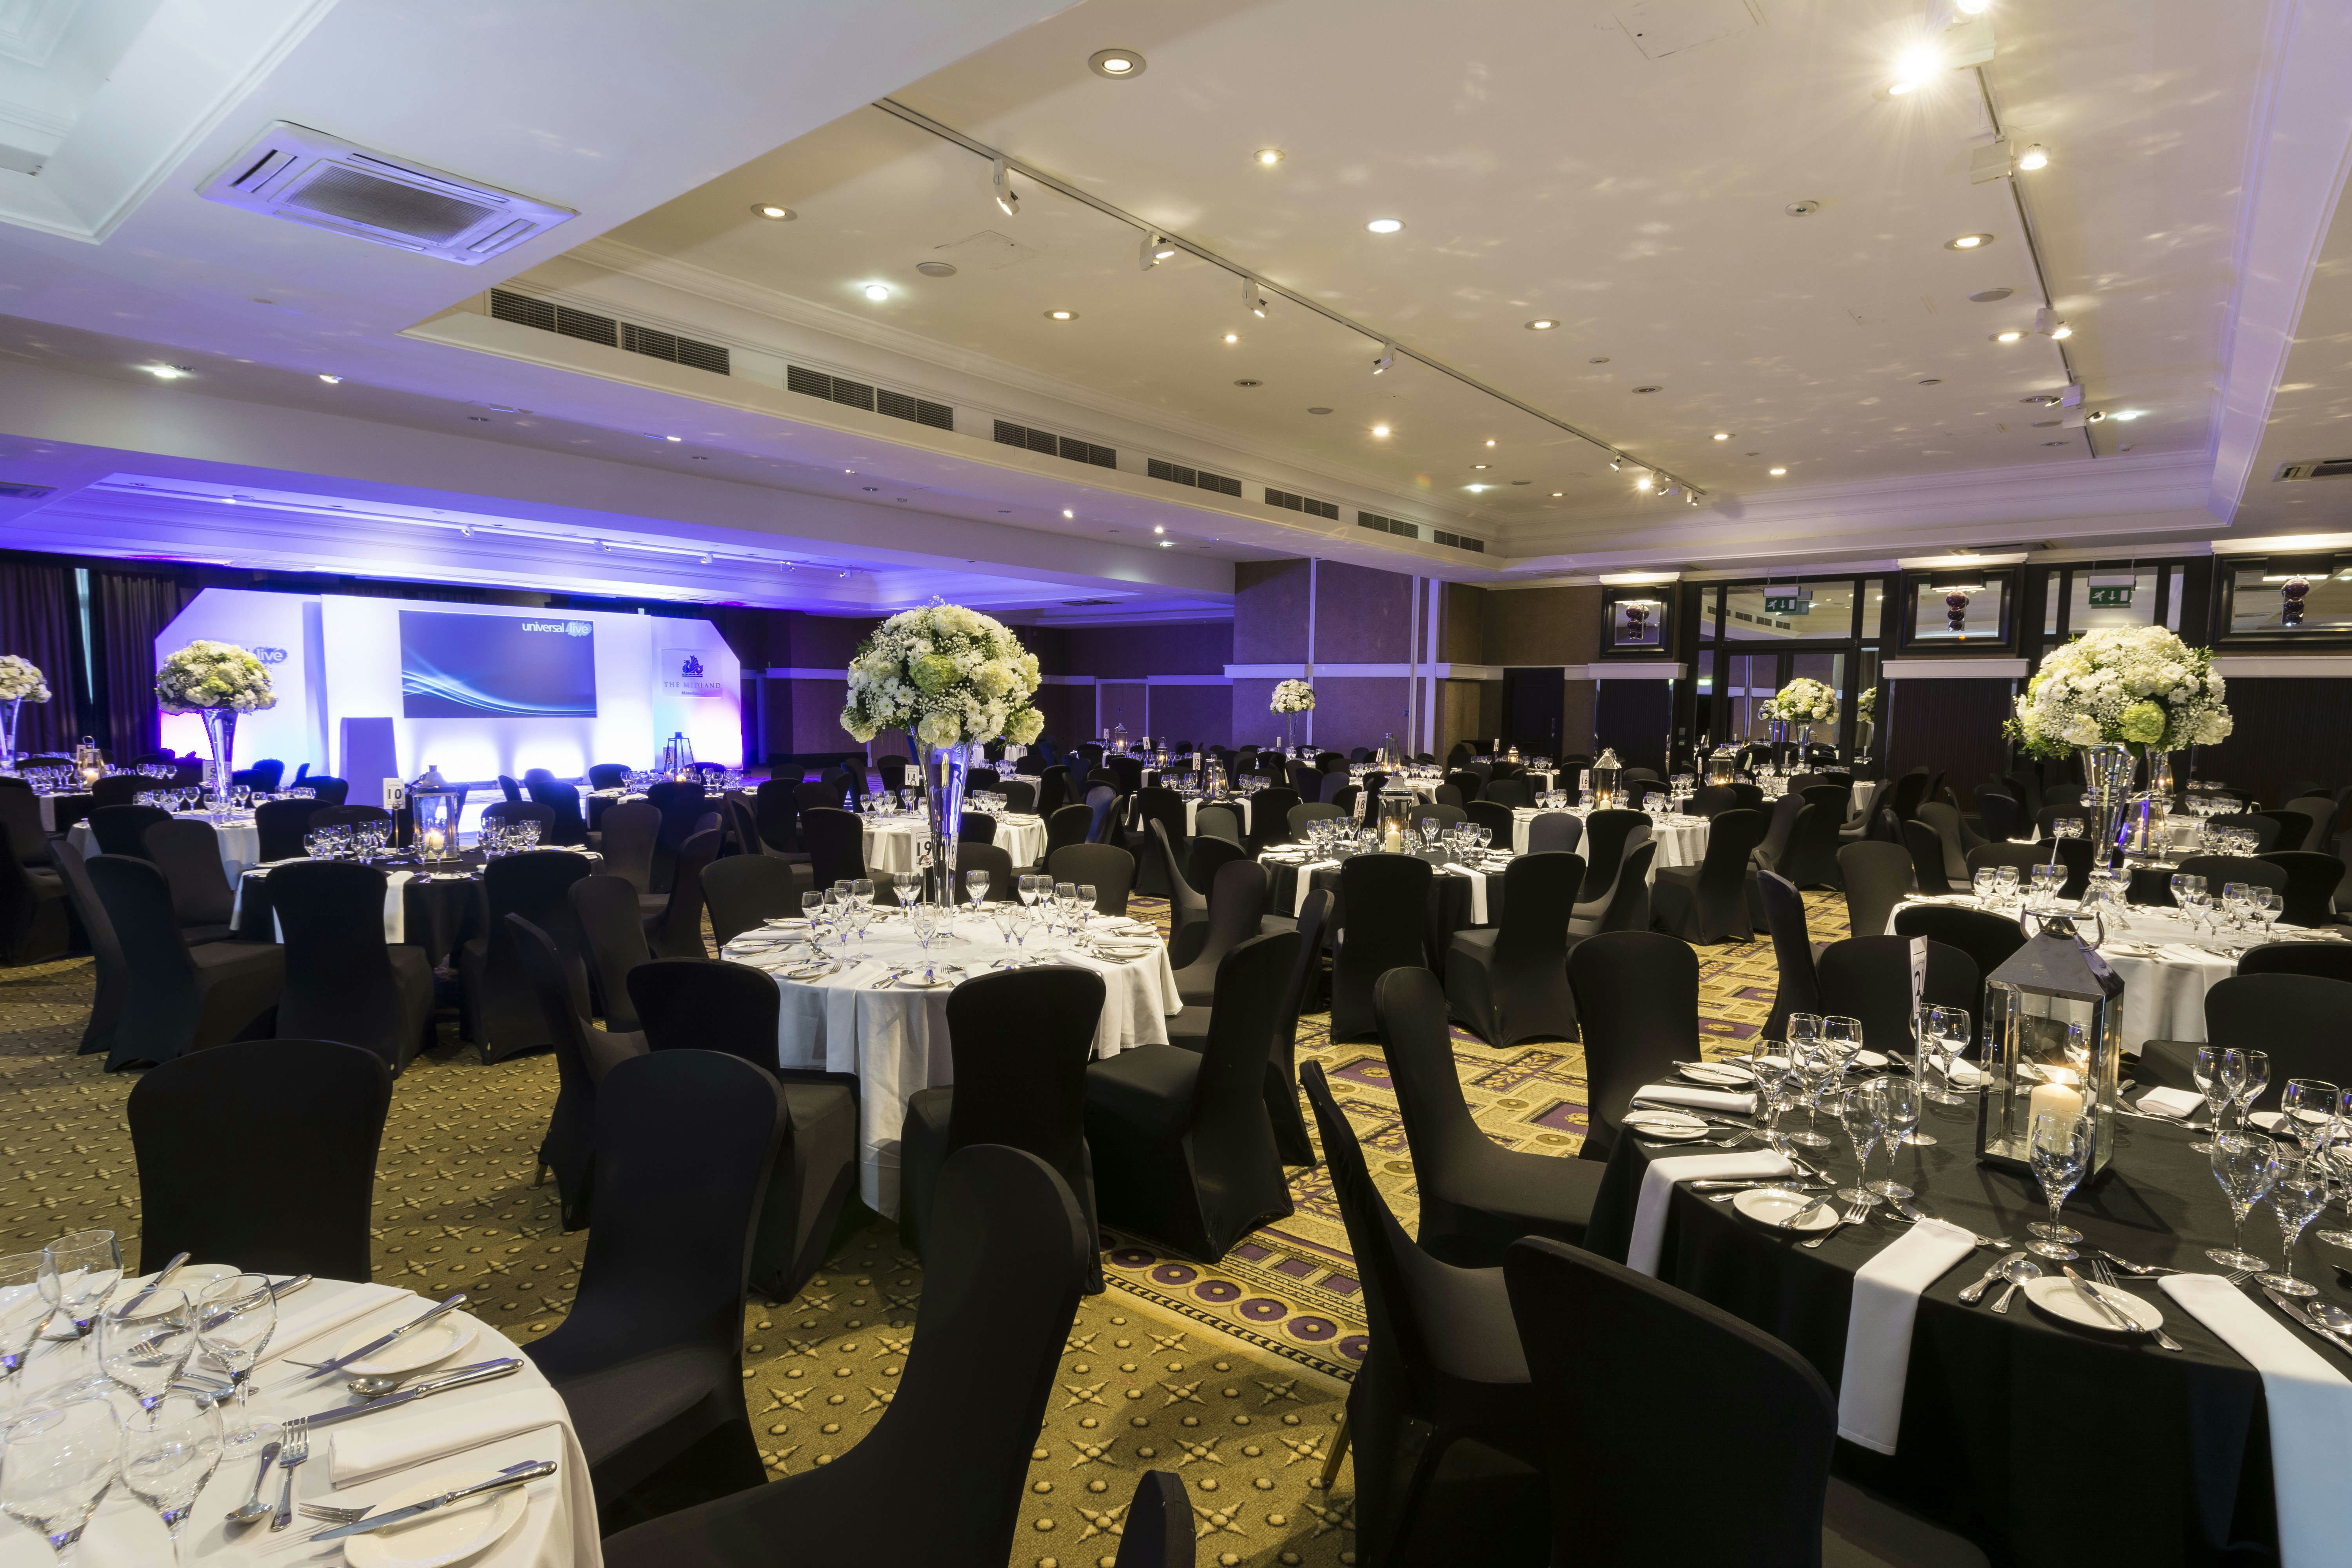 Banqueting Venues in Manchester - The Midland Hotel